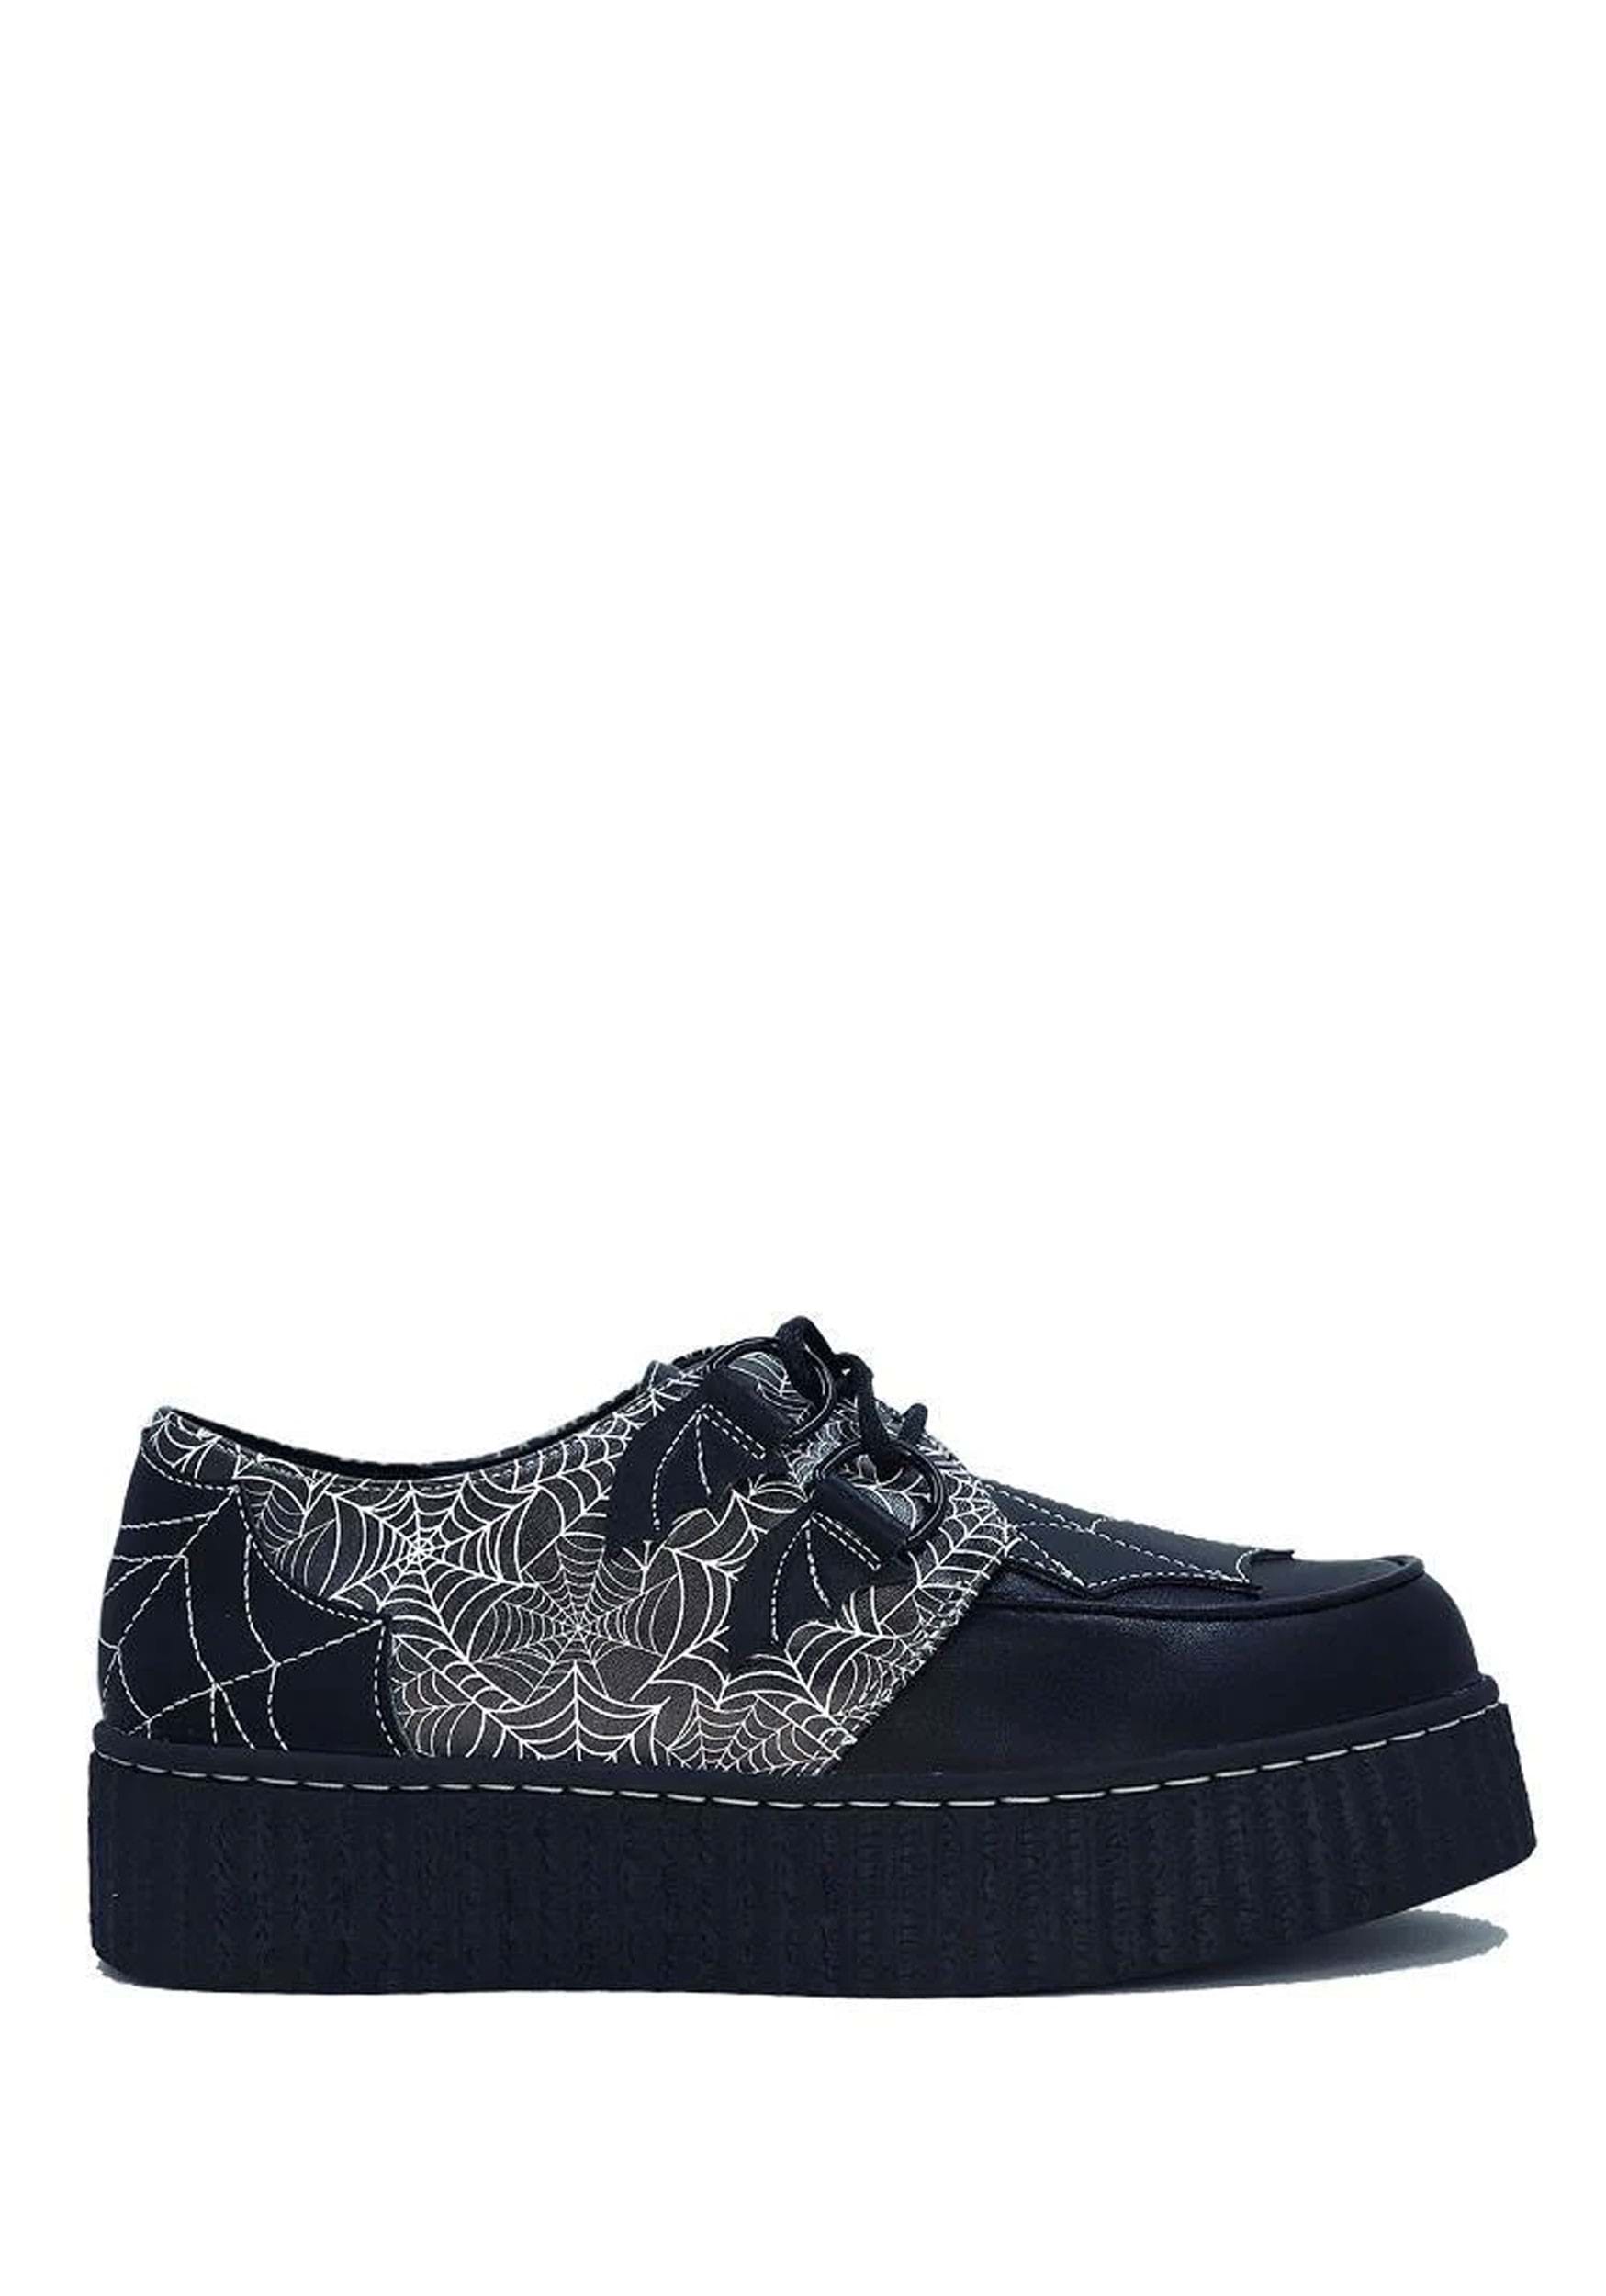 Krypt Spiderweb Creeper Shoes for Women